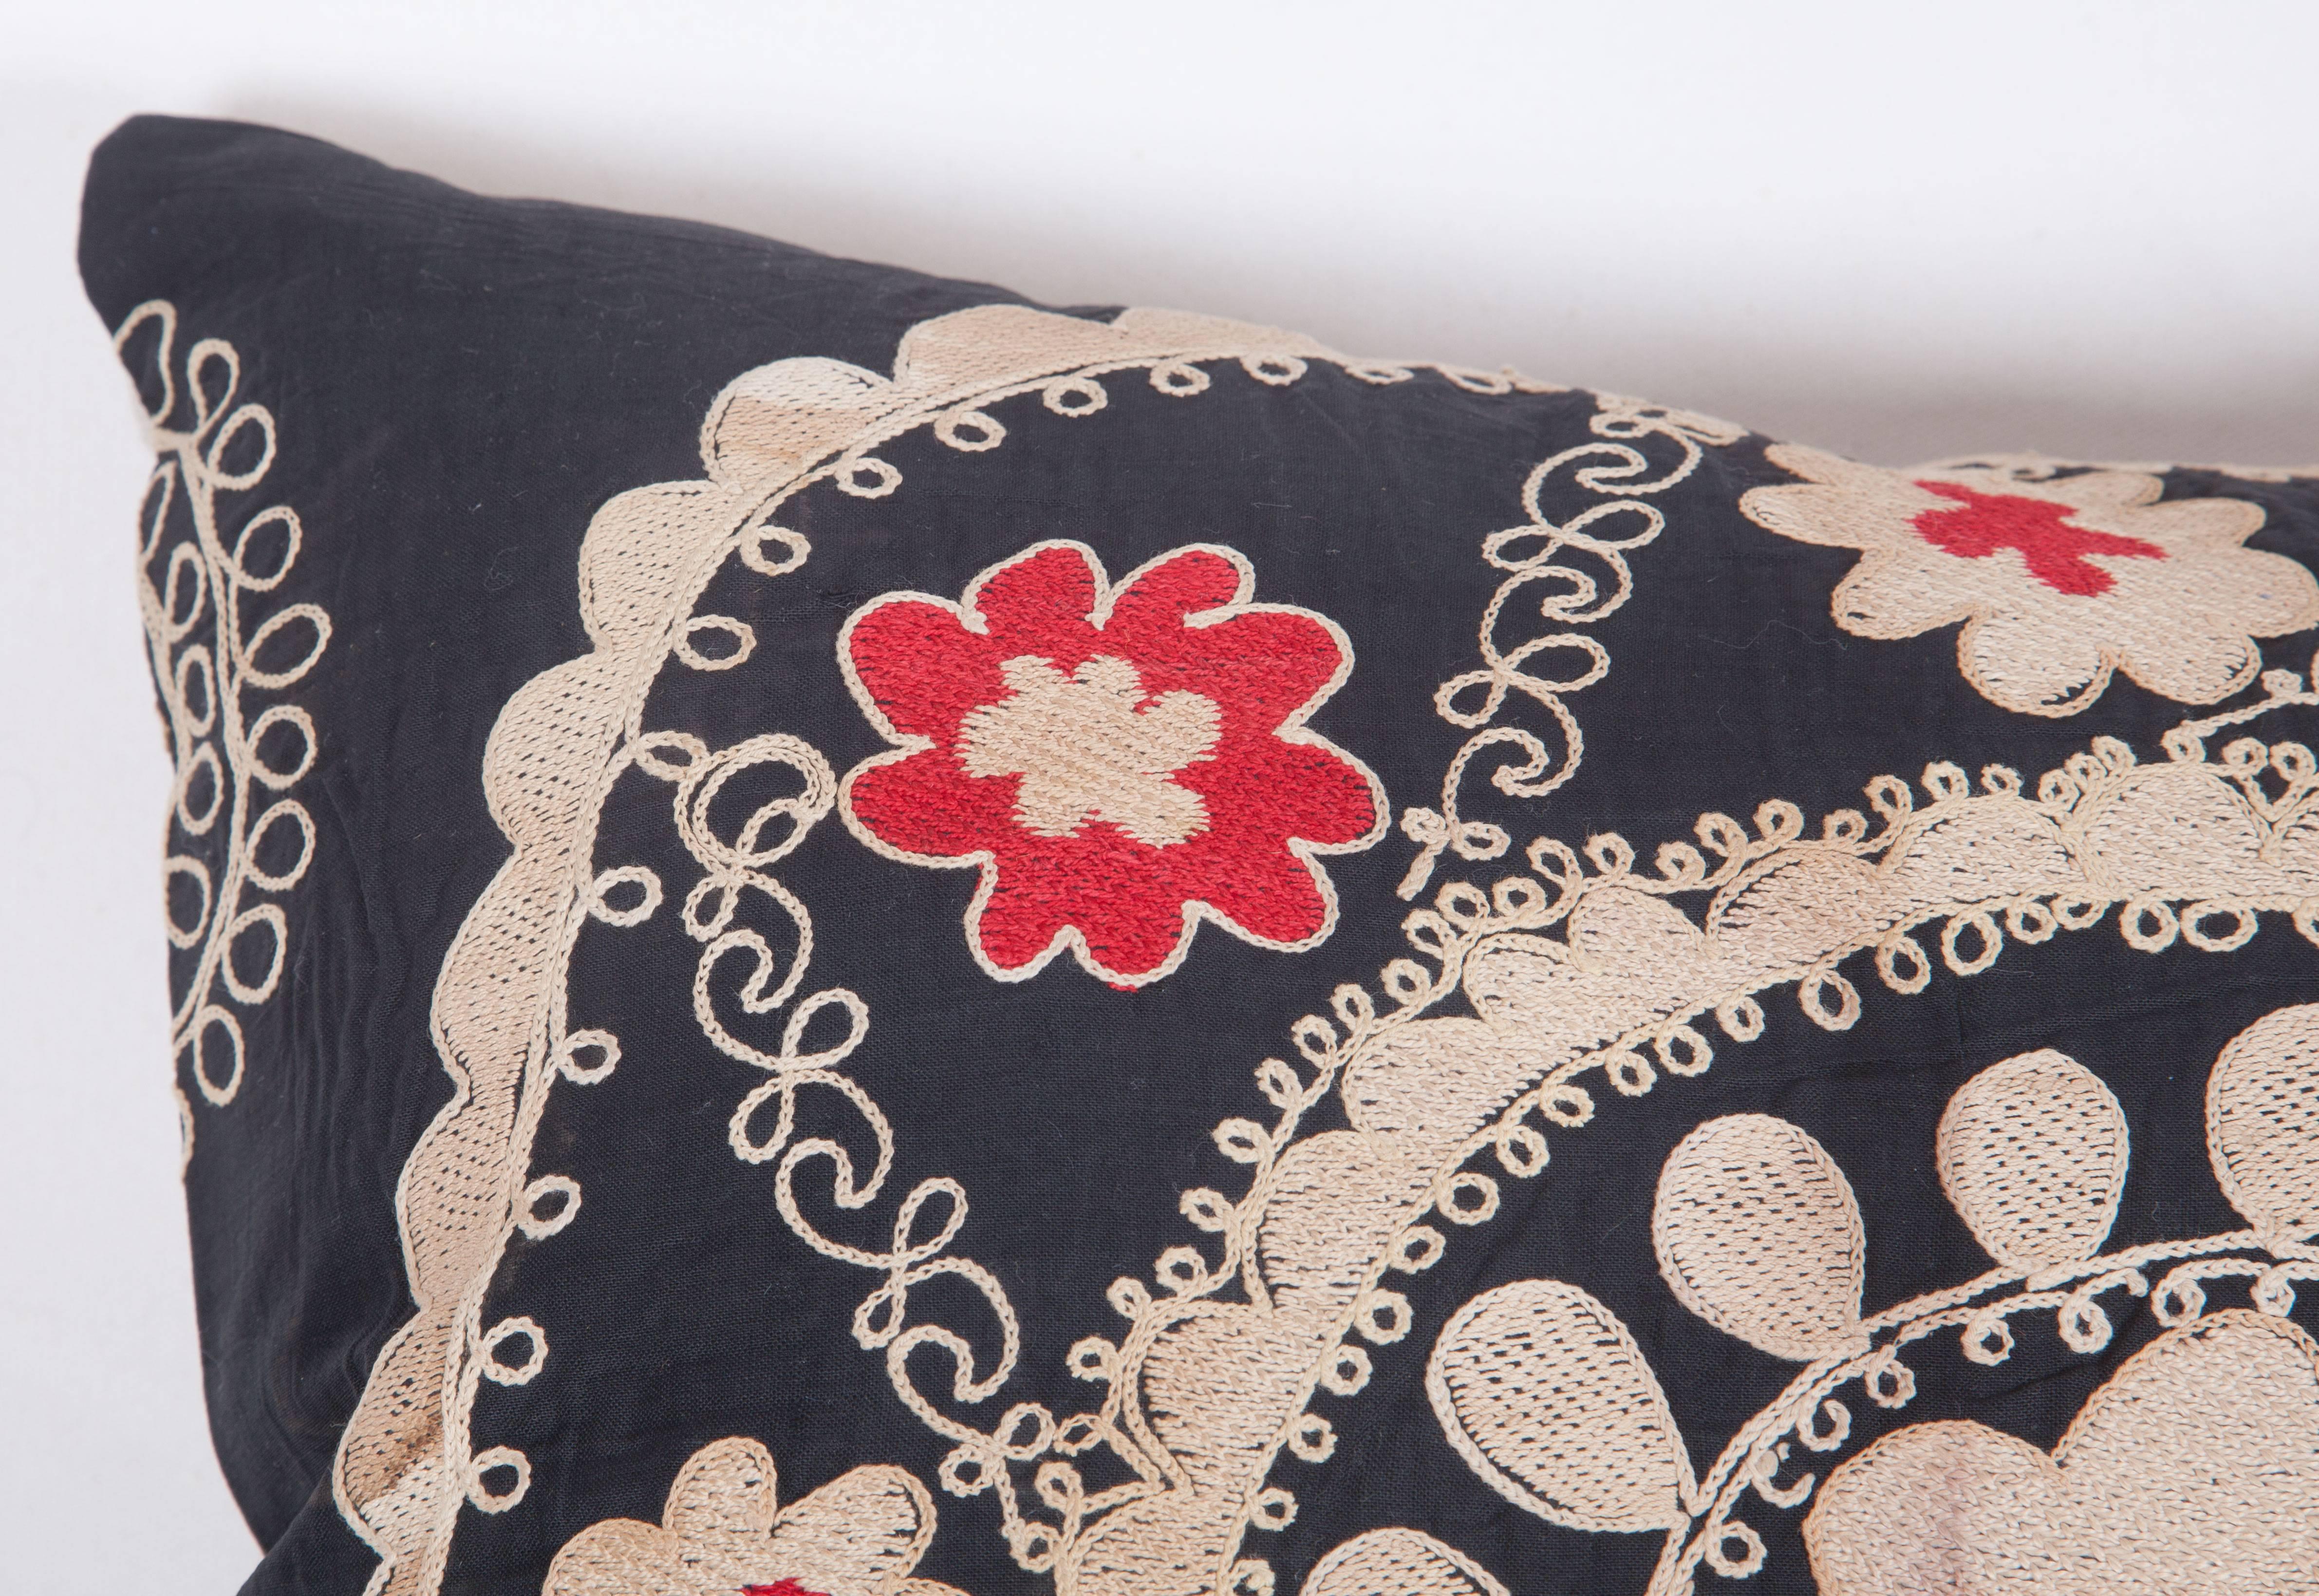 Embroidered Vintage Pillow Made Out of an Mid-20th Century Uzbek Samarkand Suzani